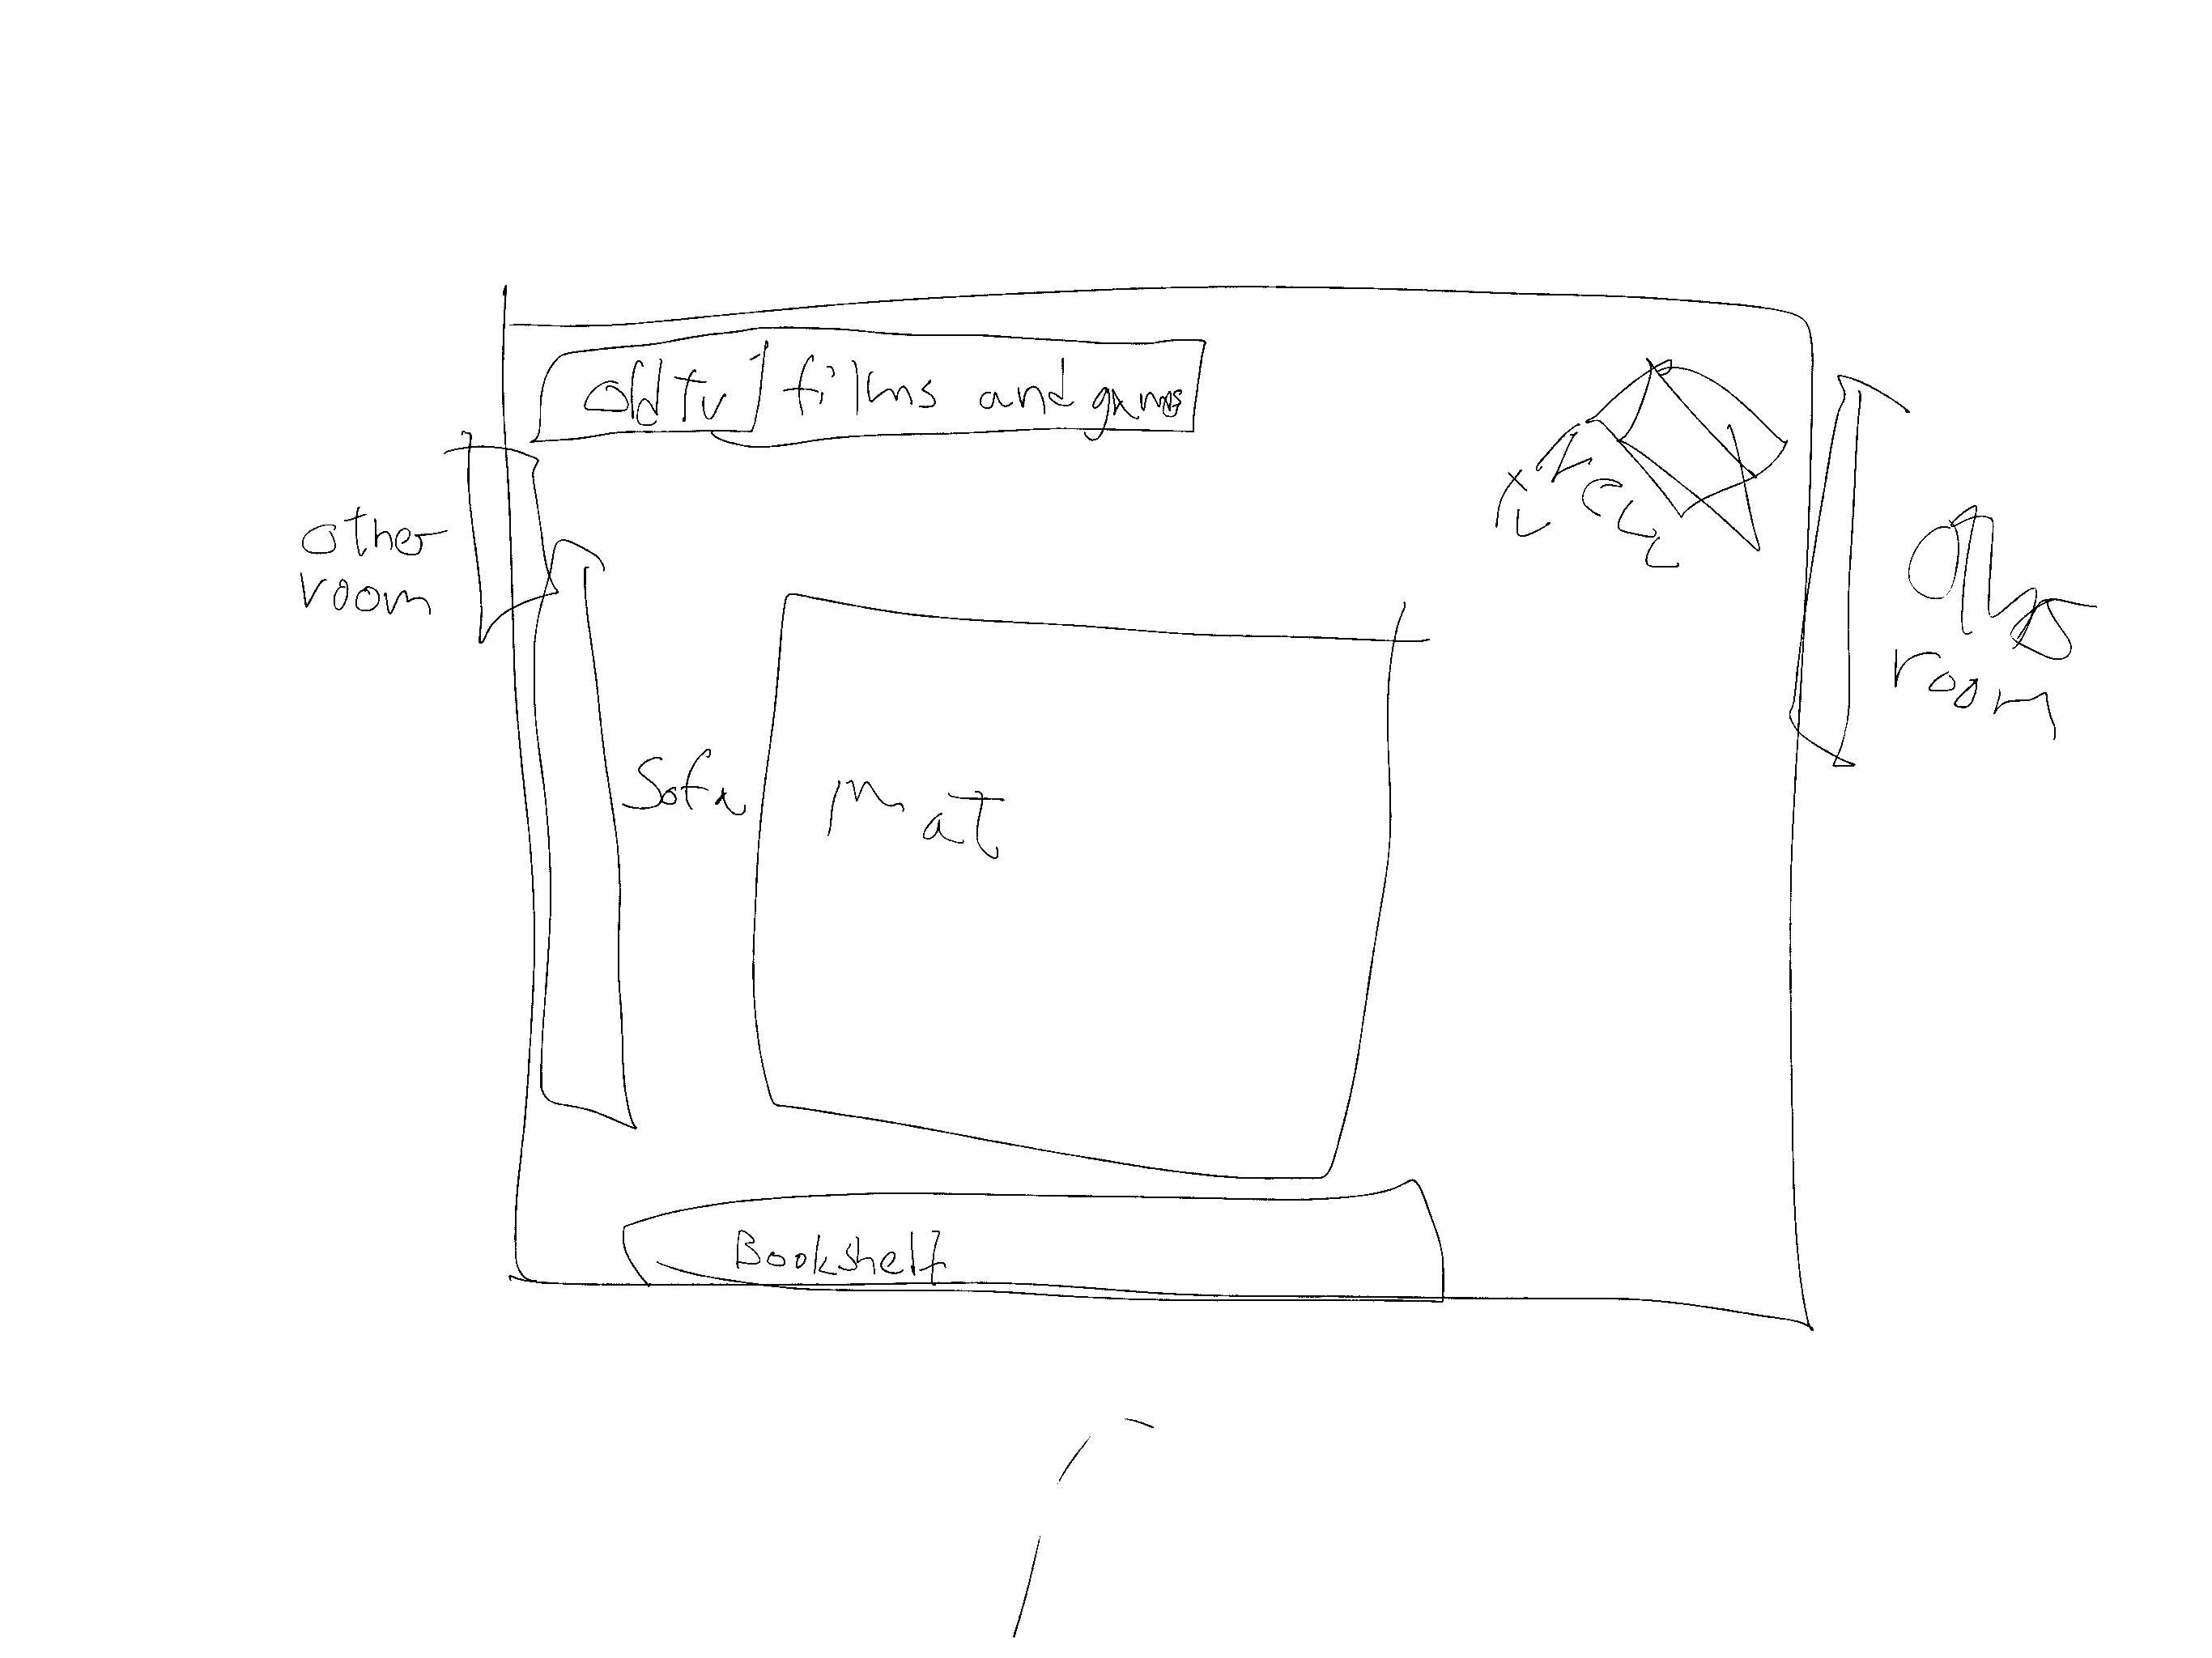 Hand drawn plan of the living room we were in